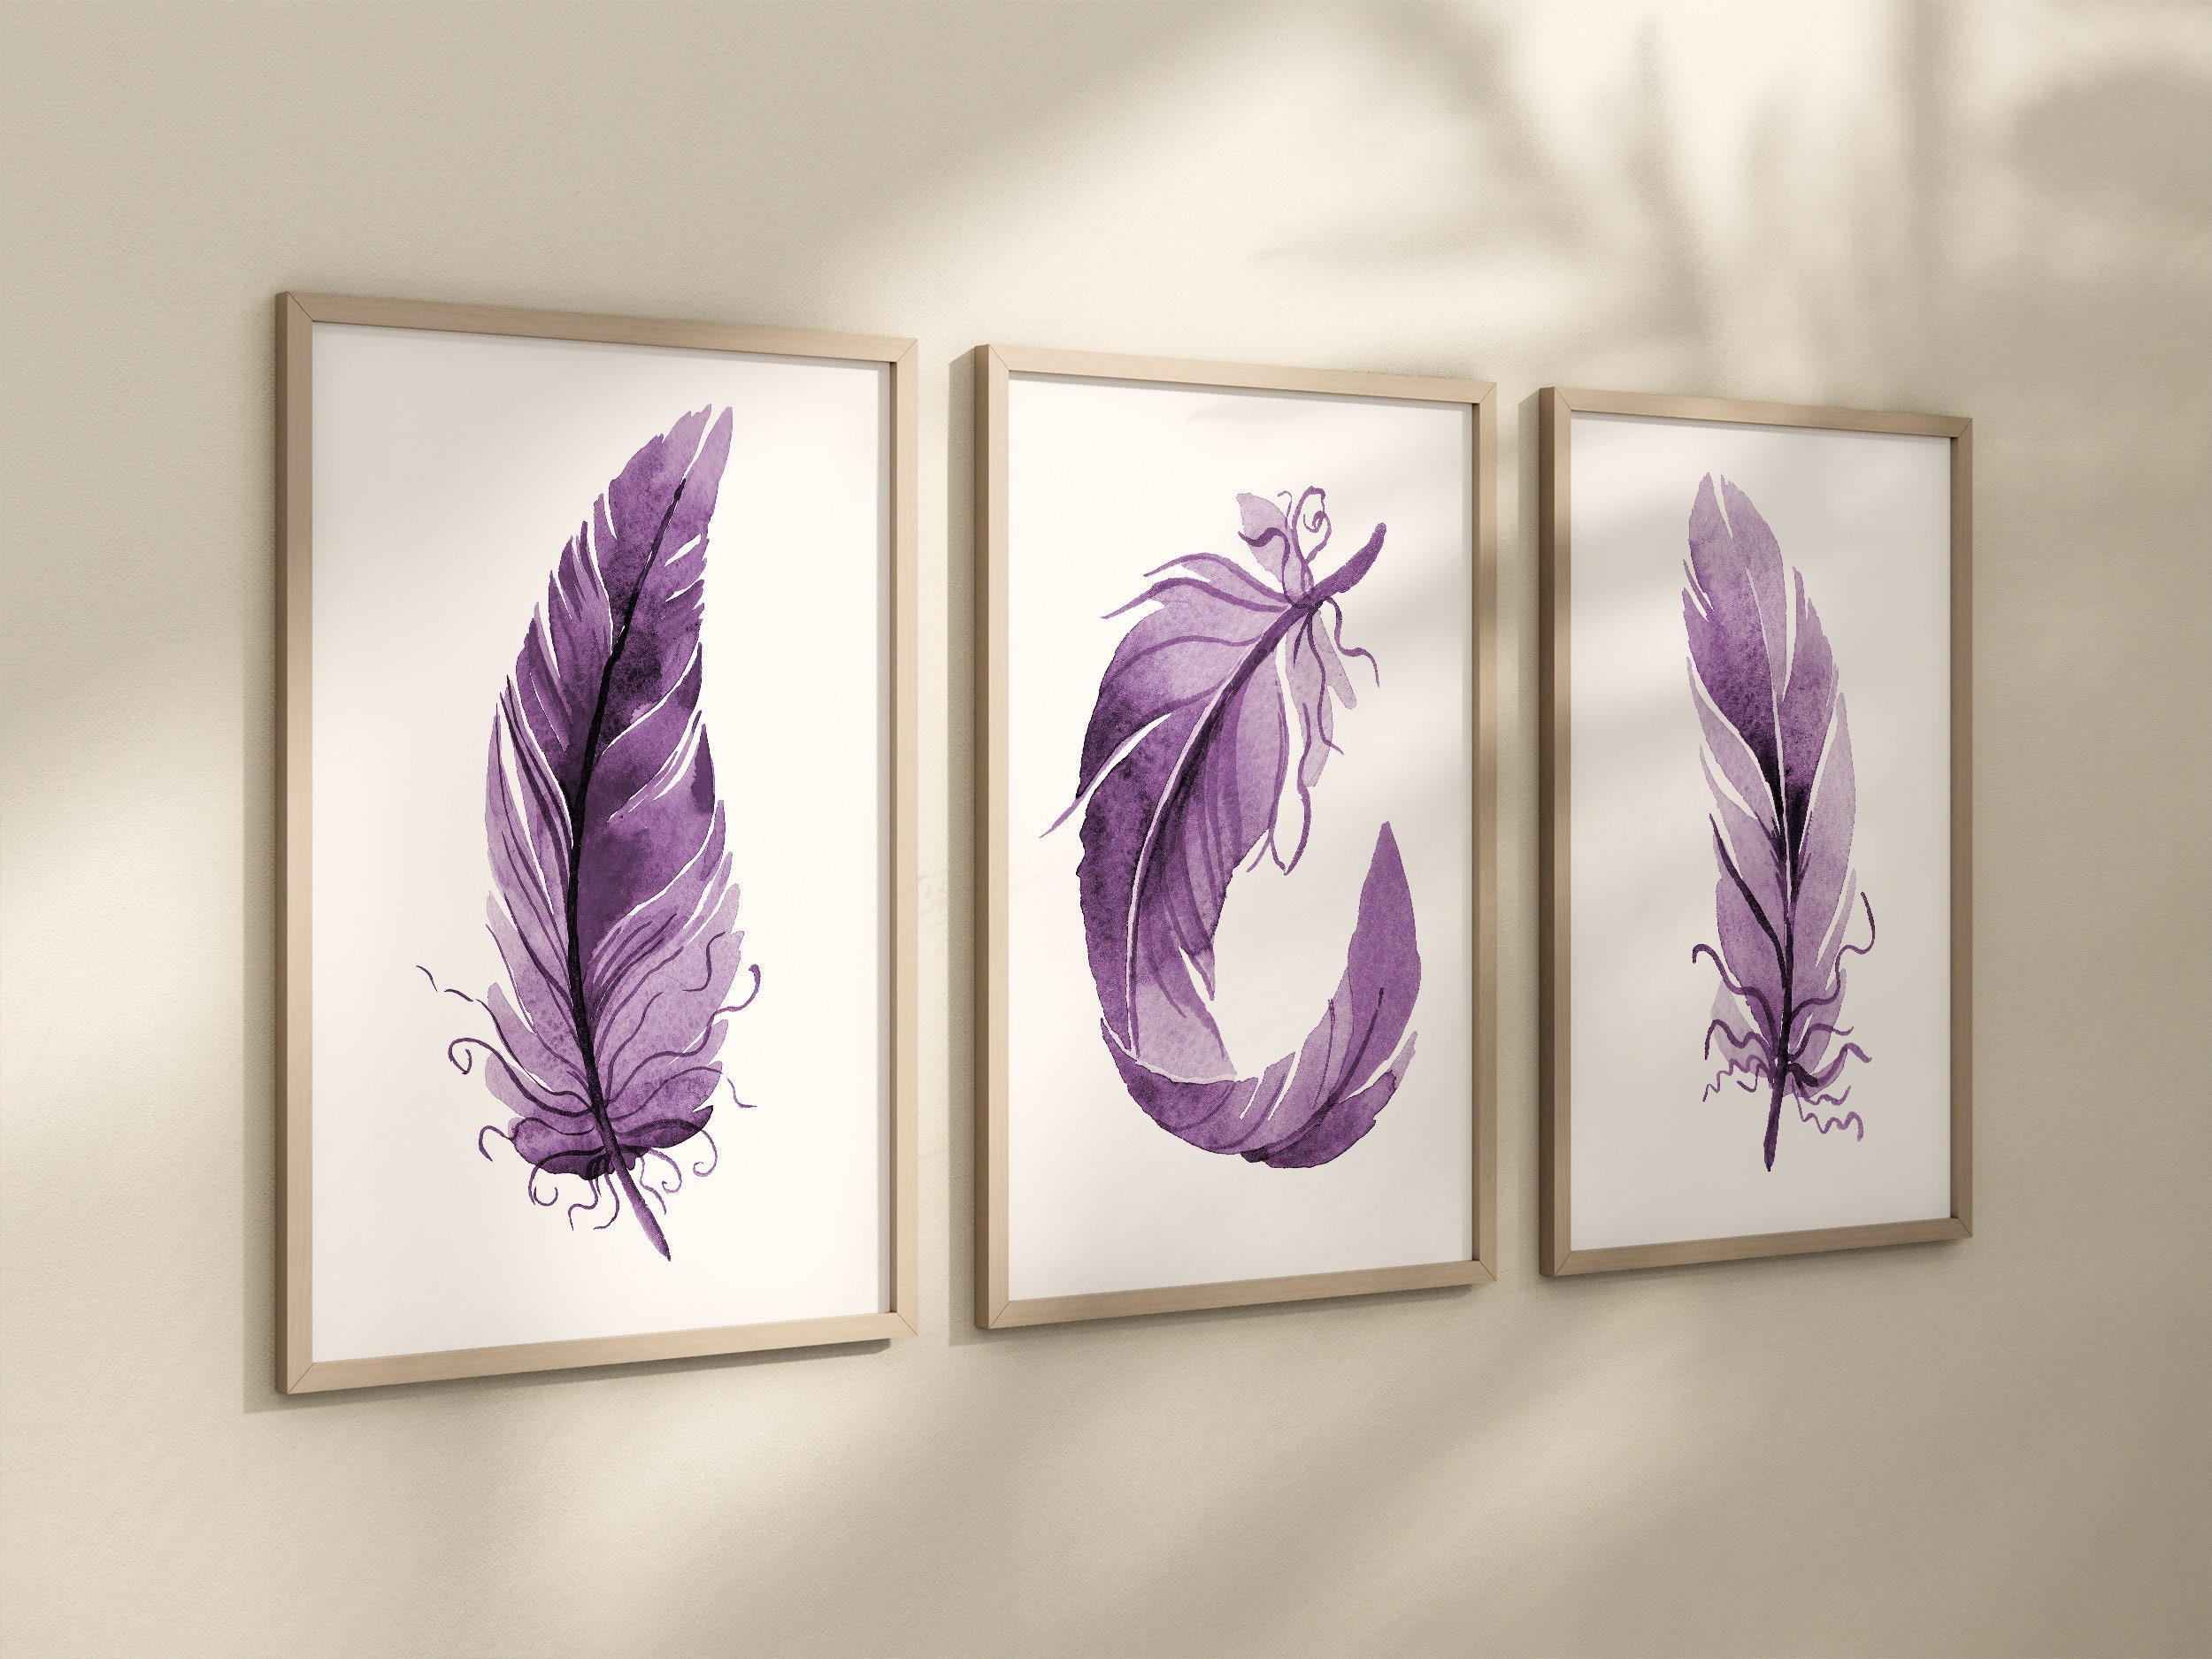 Designart 'Ethnic Purple Feathers Composition' Bohemian & Eclectic Framed  Canvas Wall Art Print 